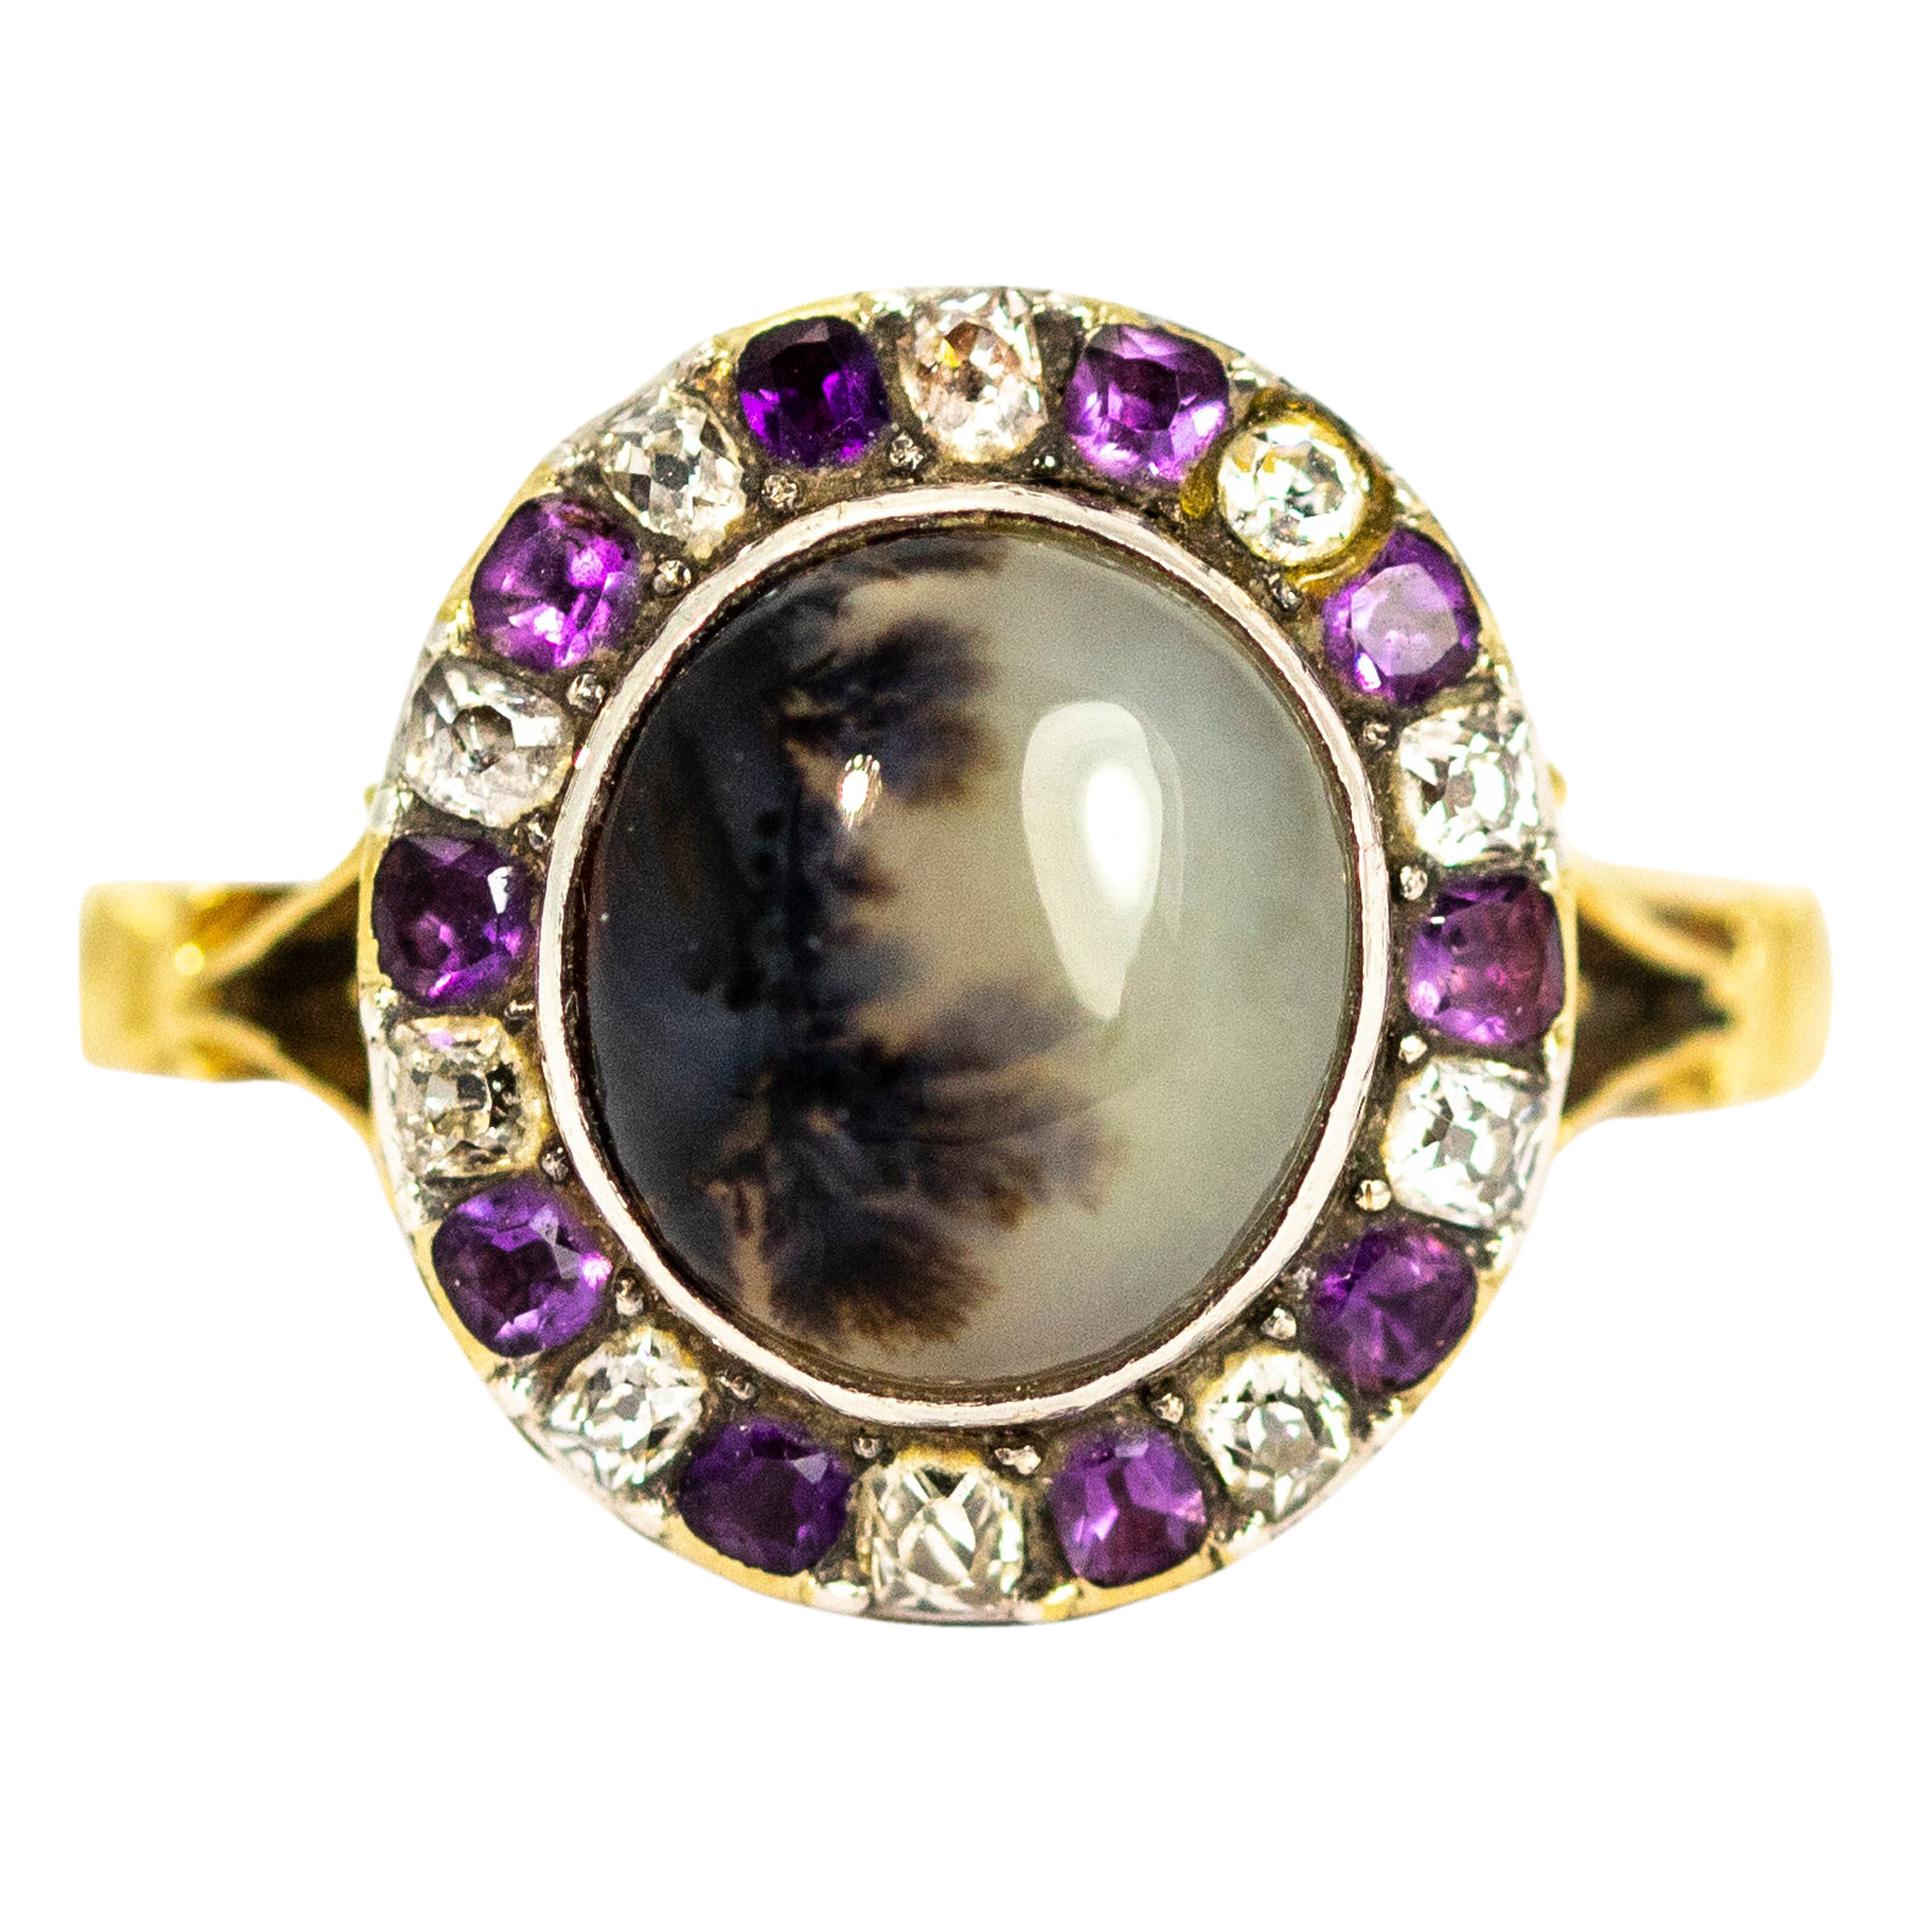 Georgian 18 Carat Gold Dendritic Agate and Diamond and Amethyst Ring